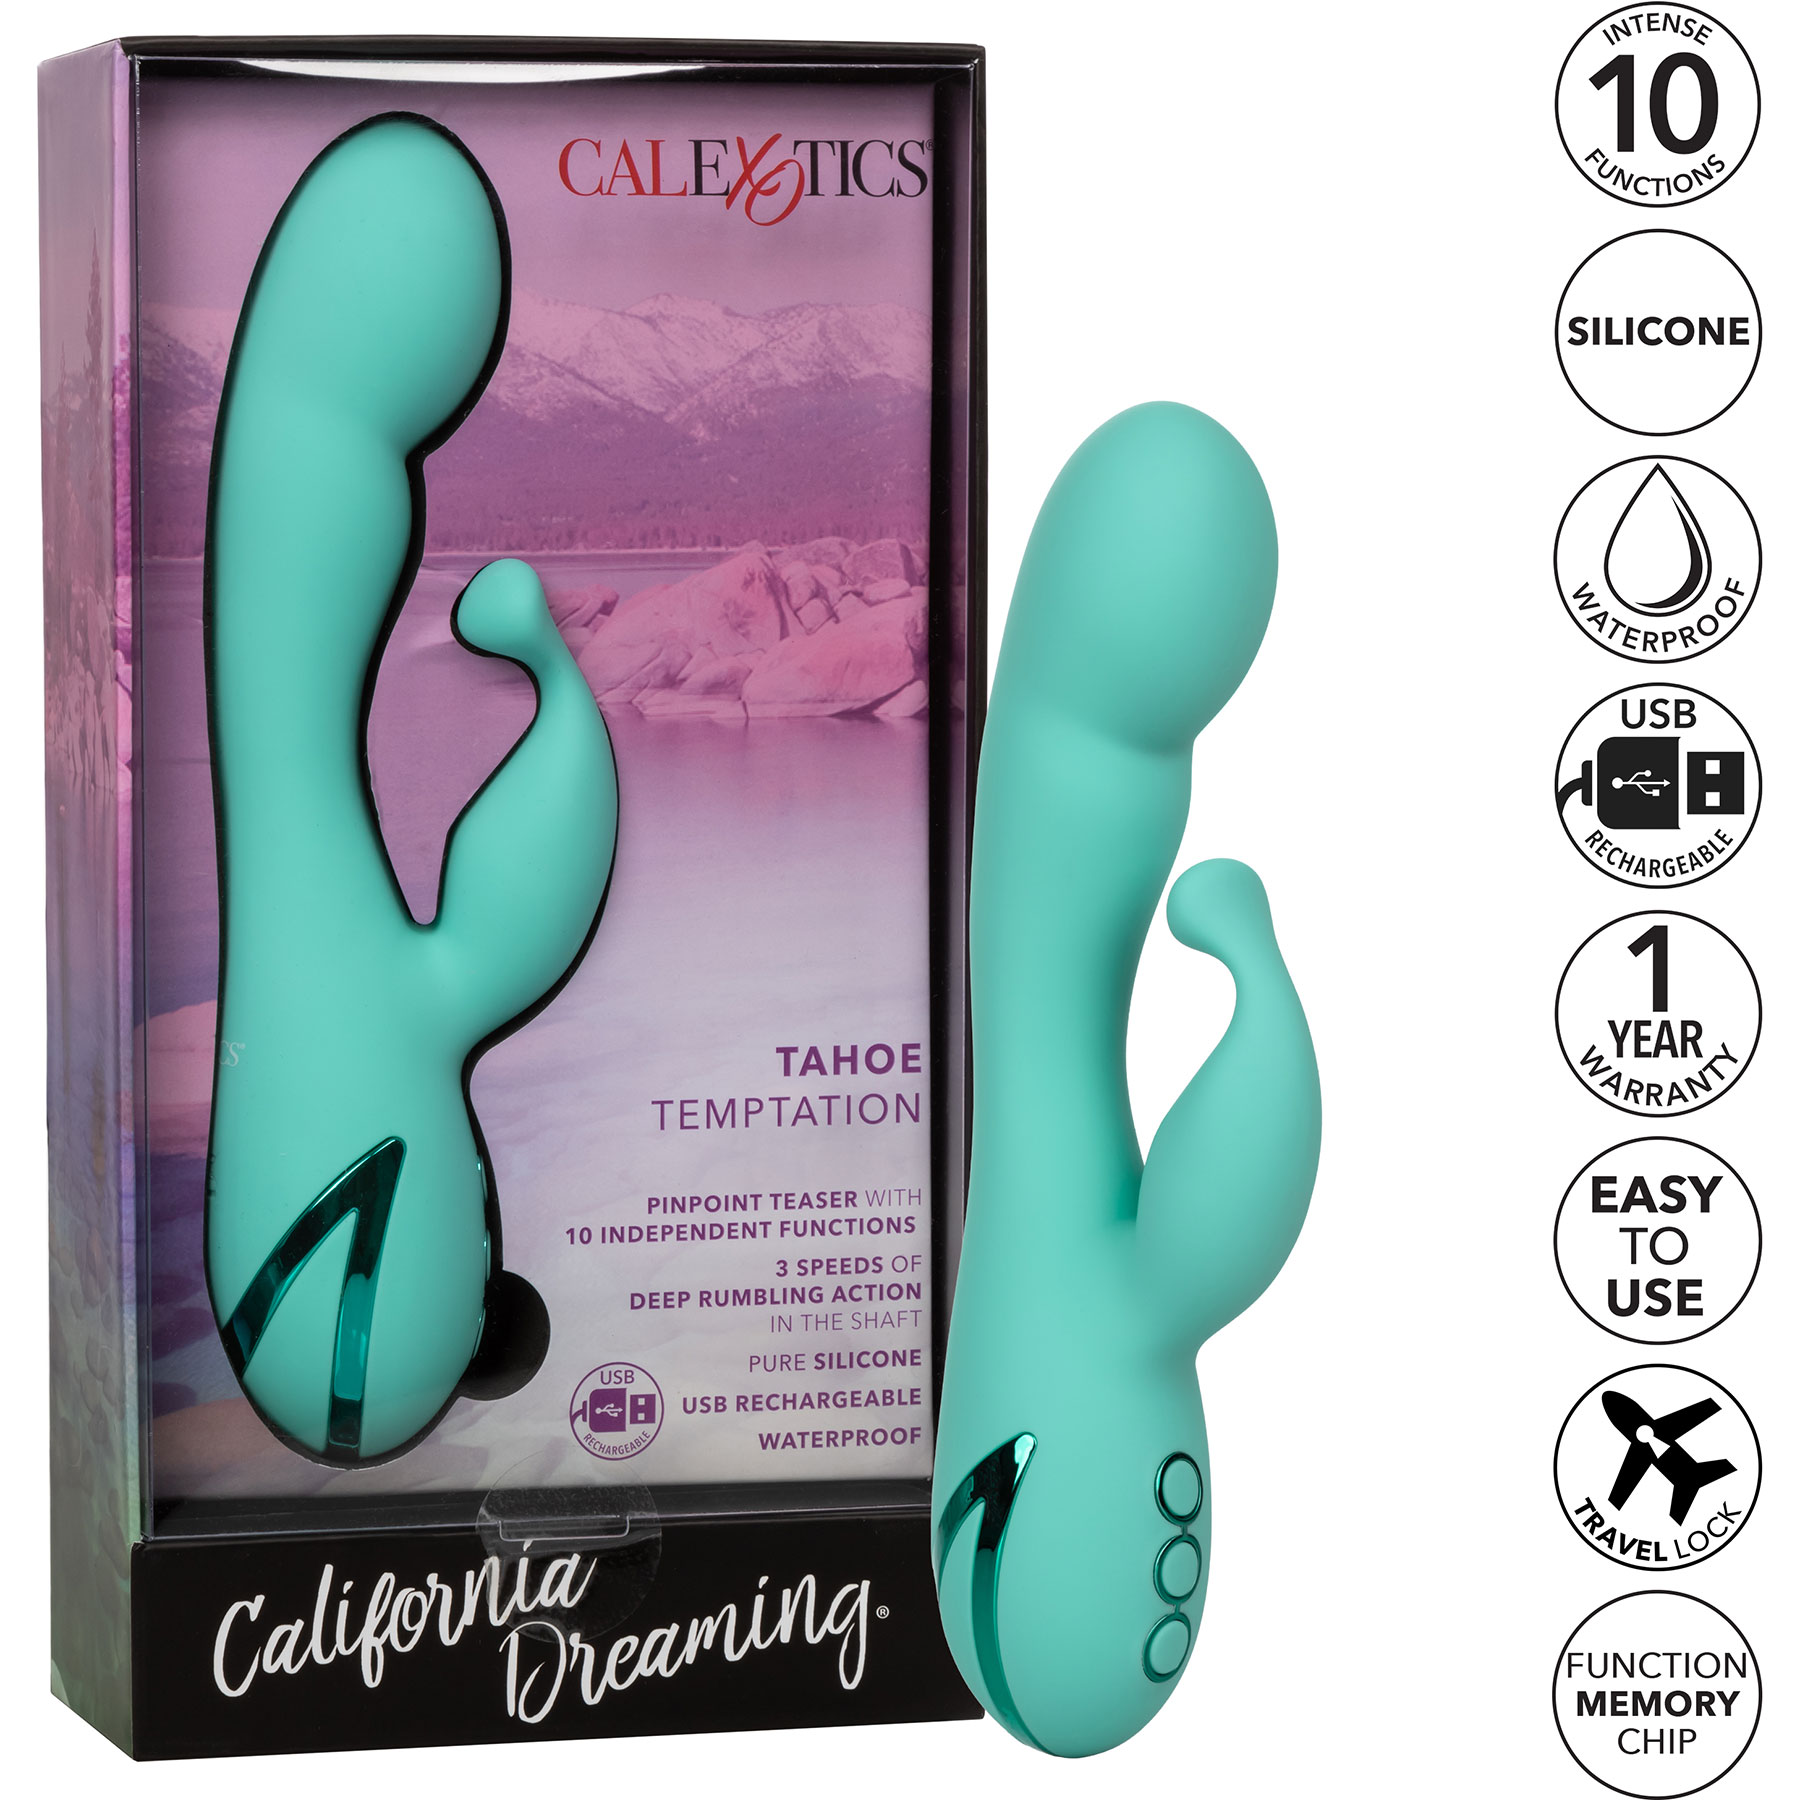 California Dreaming Tahoe Temptation Rabbit Style Silicone Vibrator - Features